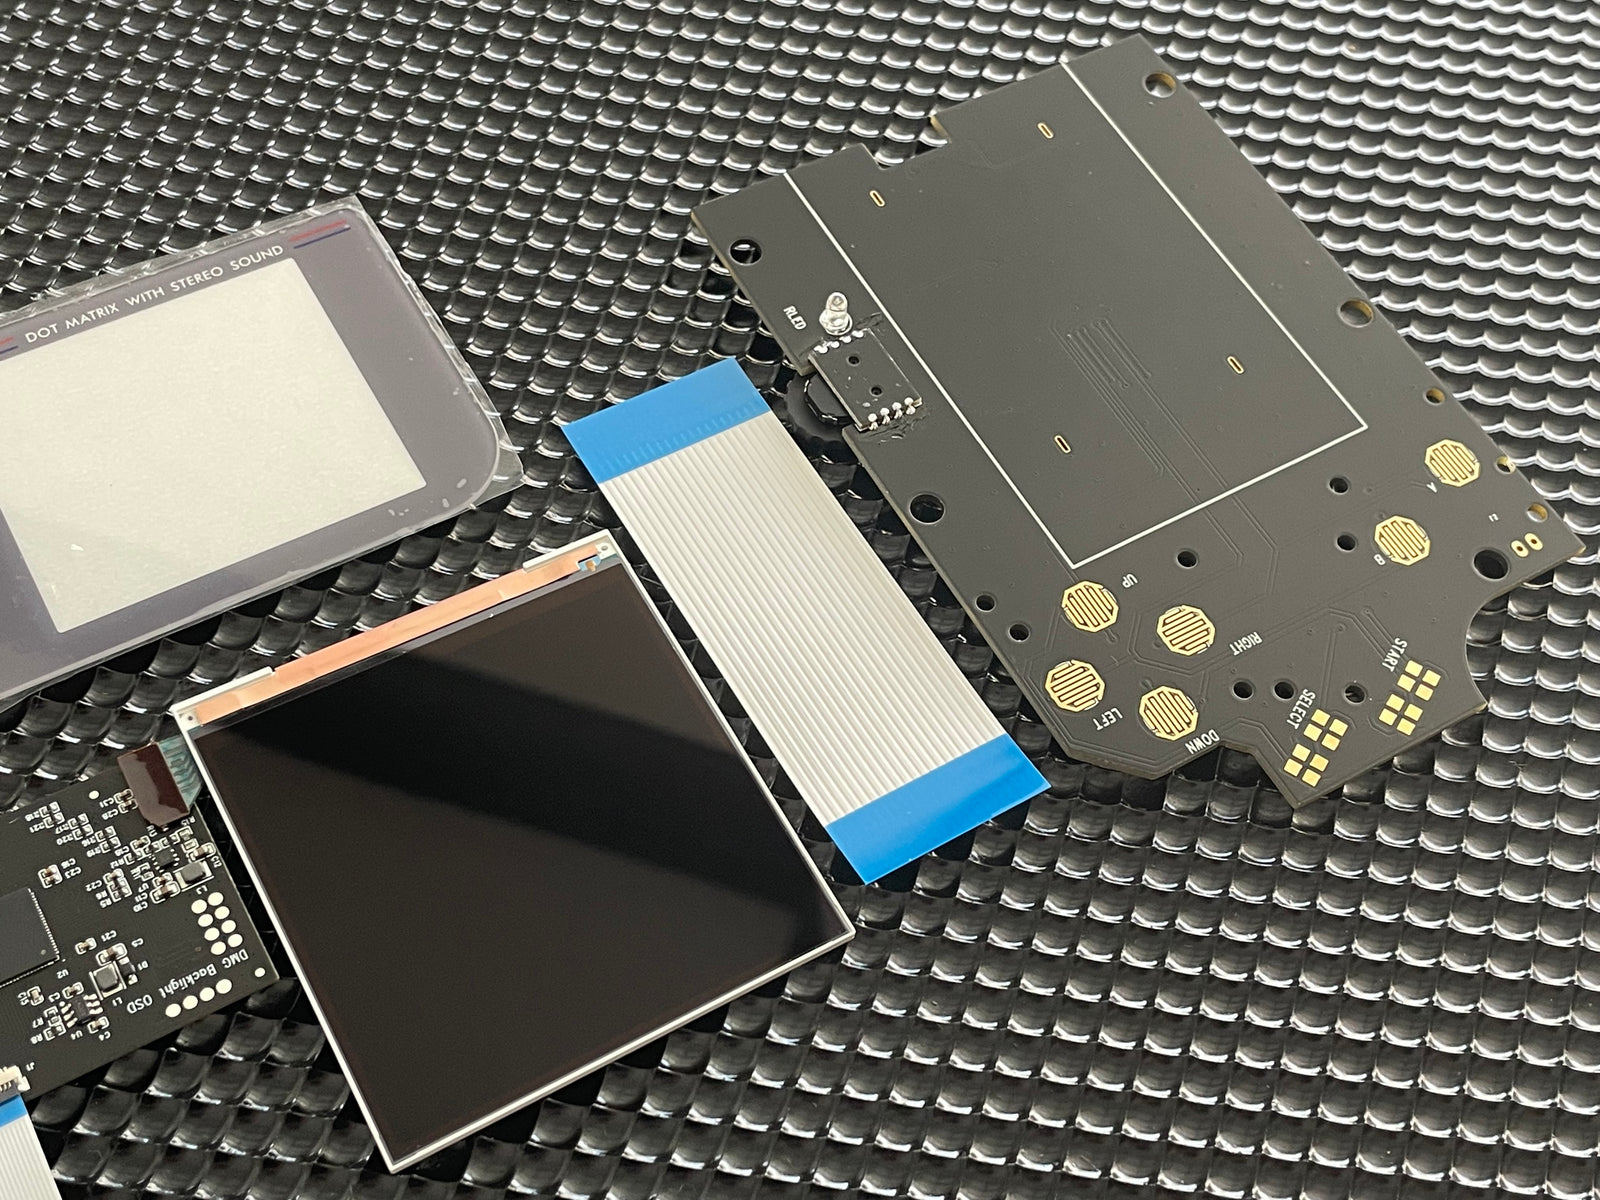 DMG IPS LCD Screen Kits - Larger with Color